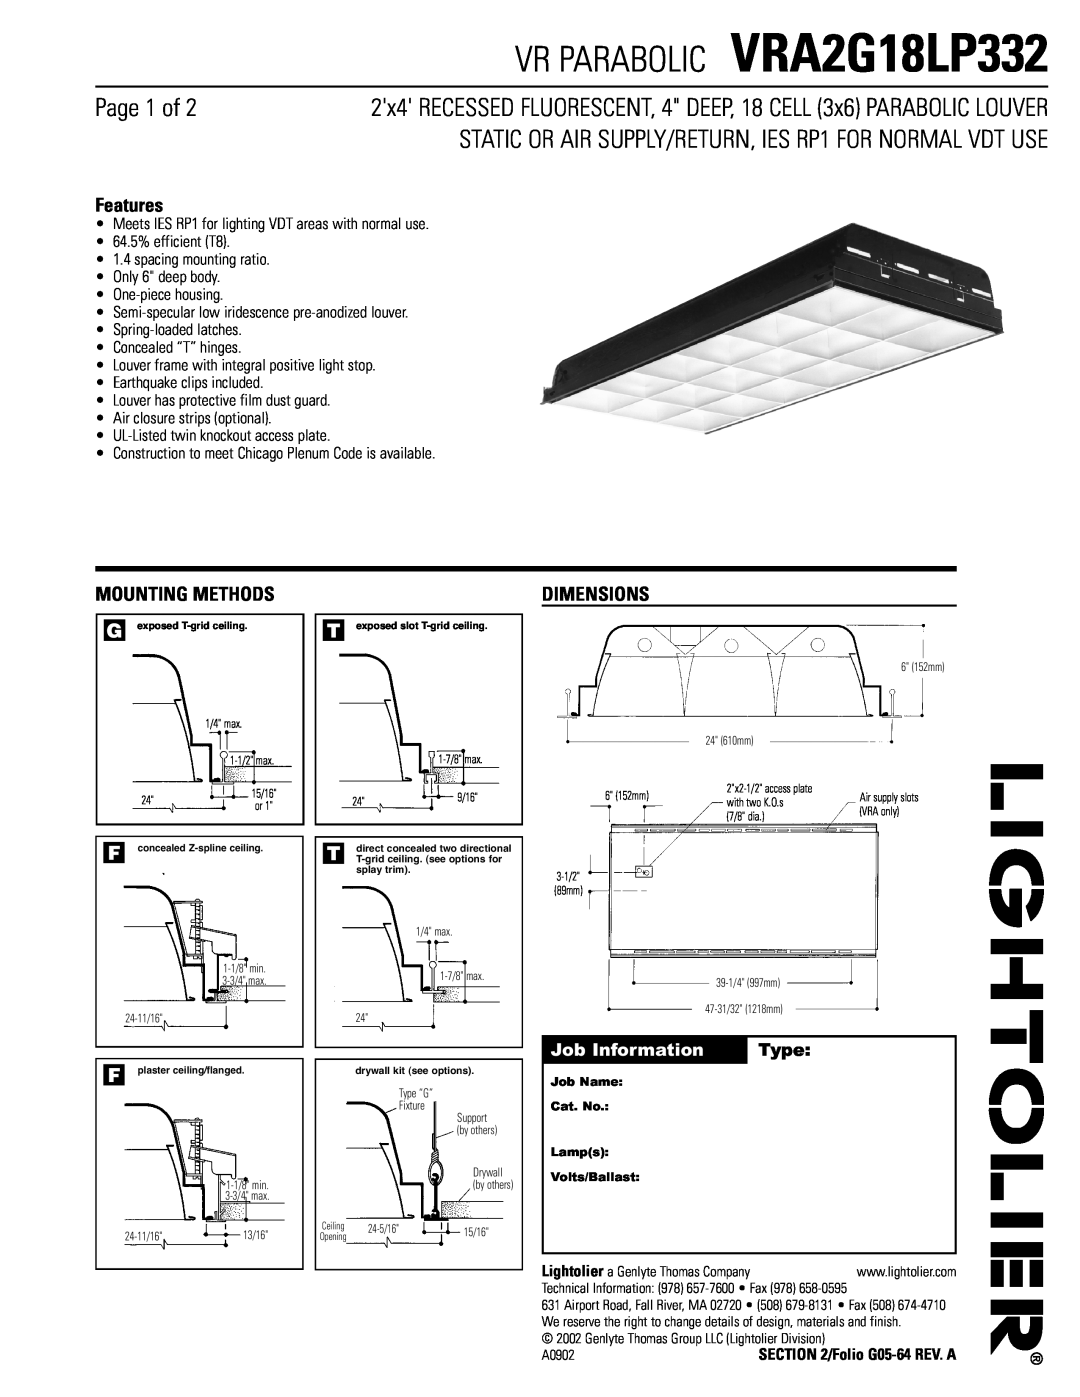 Lightolier dimensions VR PARABOLIC VRA2G18LP332, Page 1 of, STATIC OR AIR SUPPLY/RETURN, IES RP1 FOR NORMAL VDT USE 